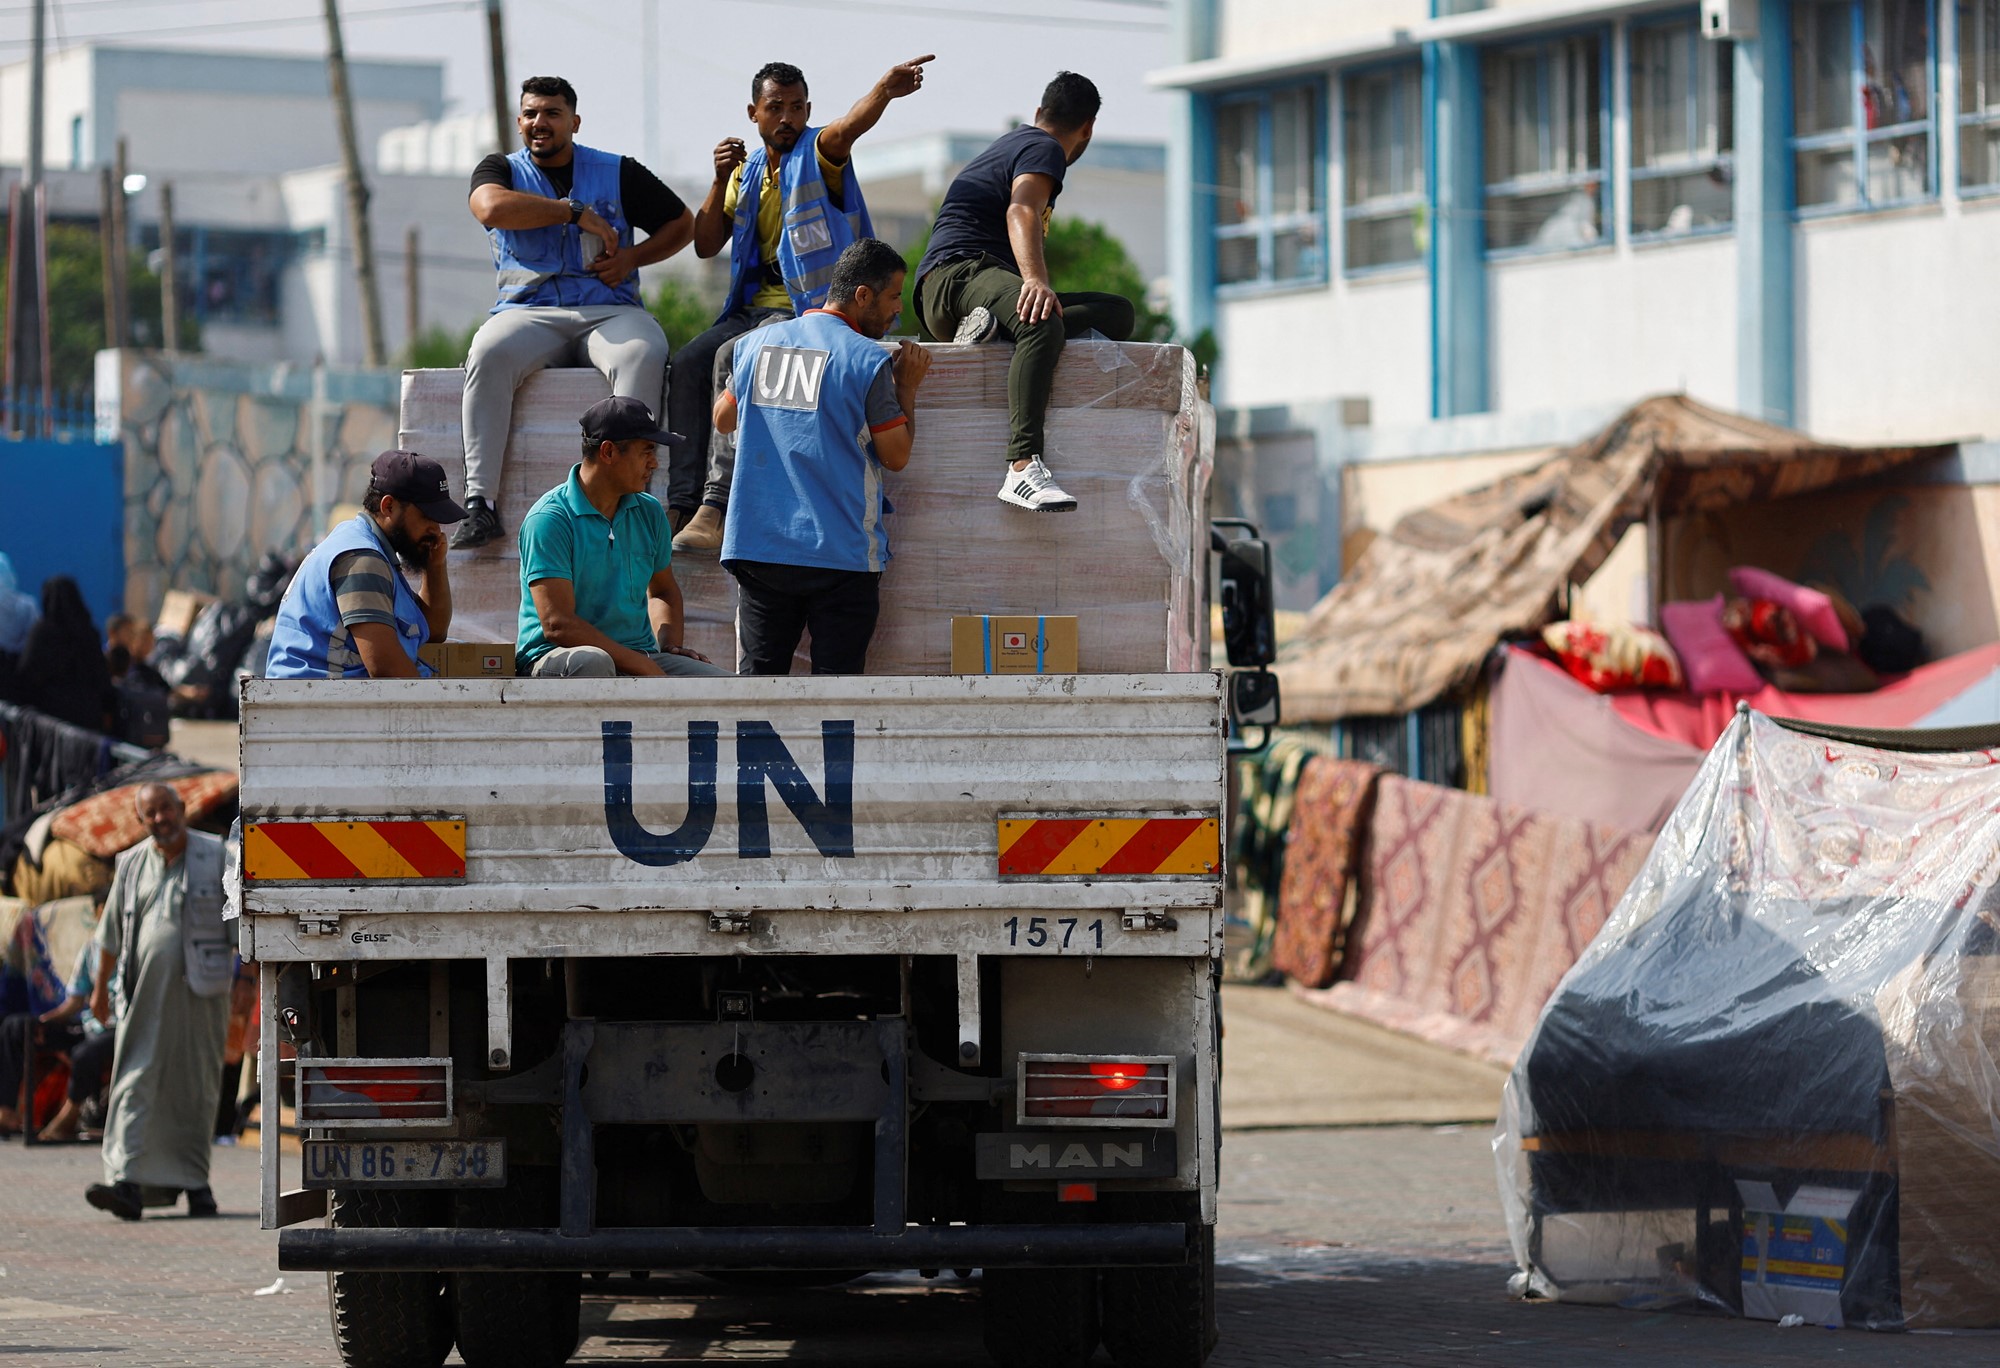 Men wearing UN-branded vests ride at the back of a truck